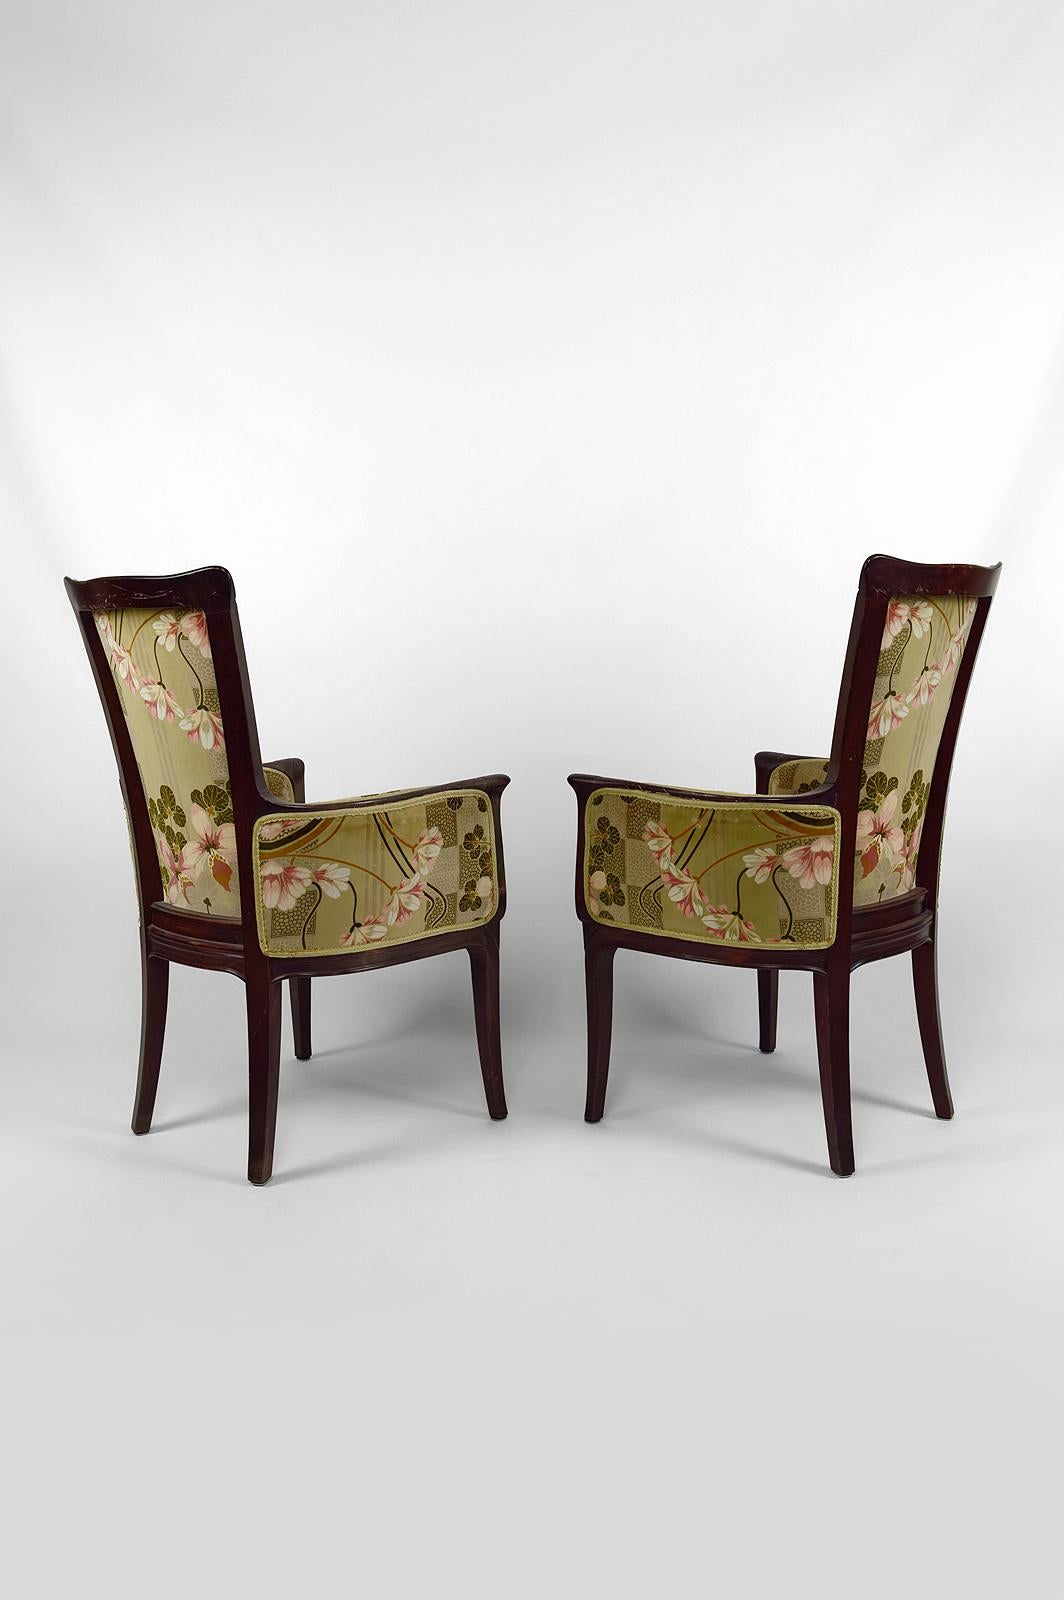 Fabric Art Nouveau salon set of 3, 2 armchairs and 1 chair, France, Circa 1900 For Sale